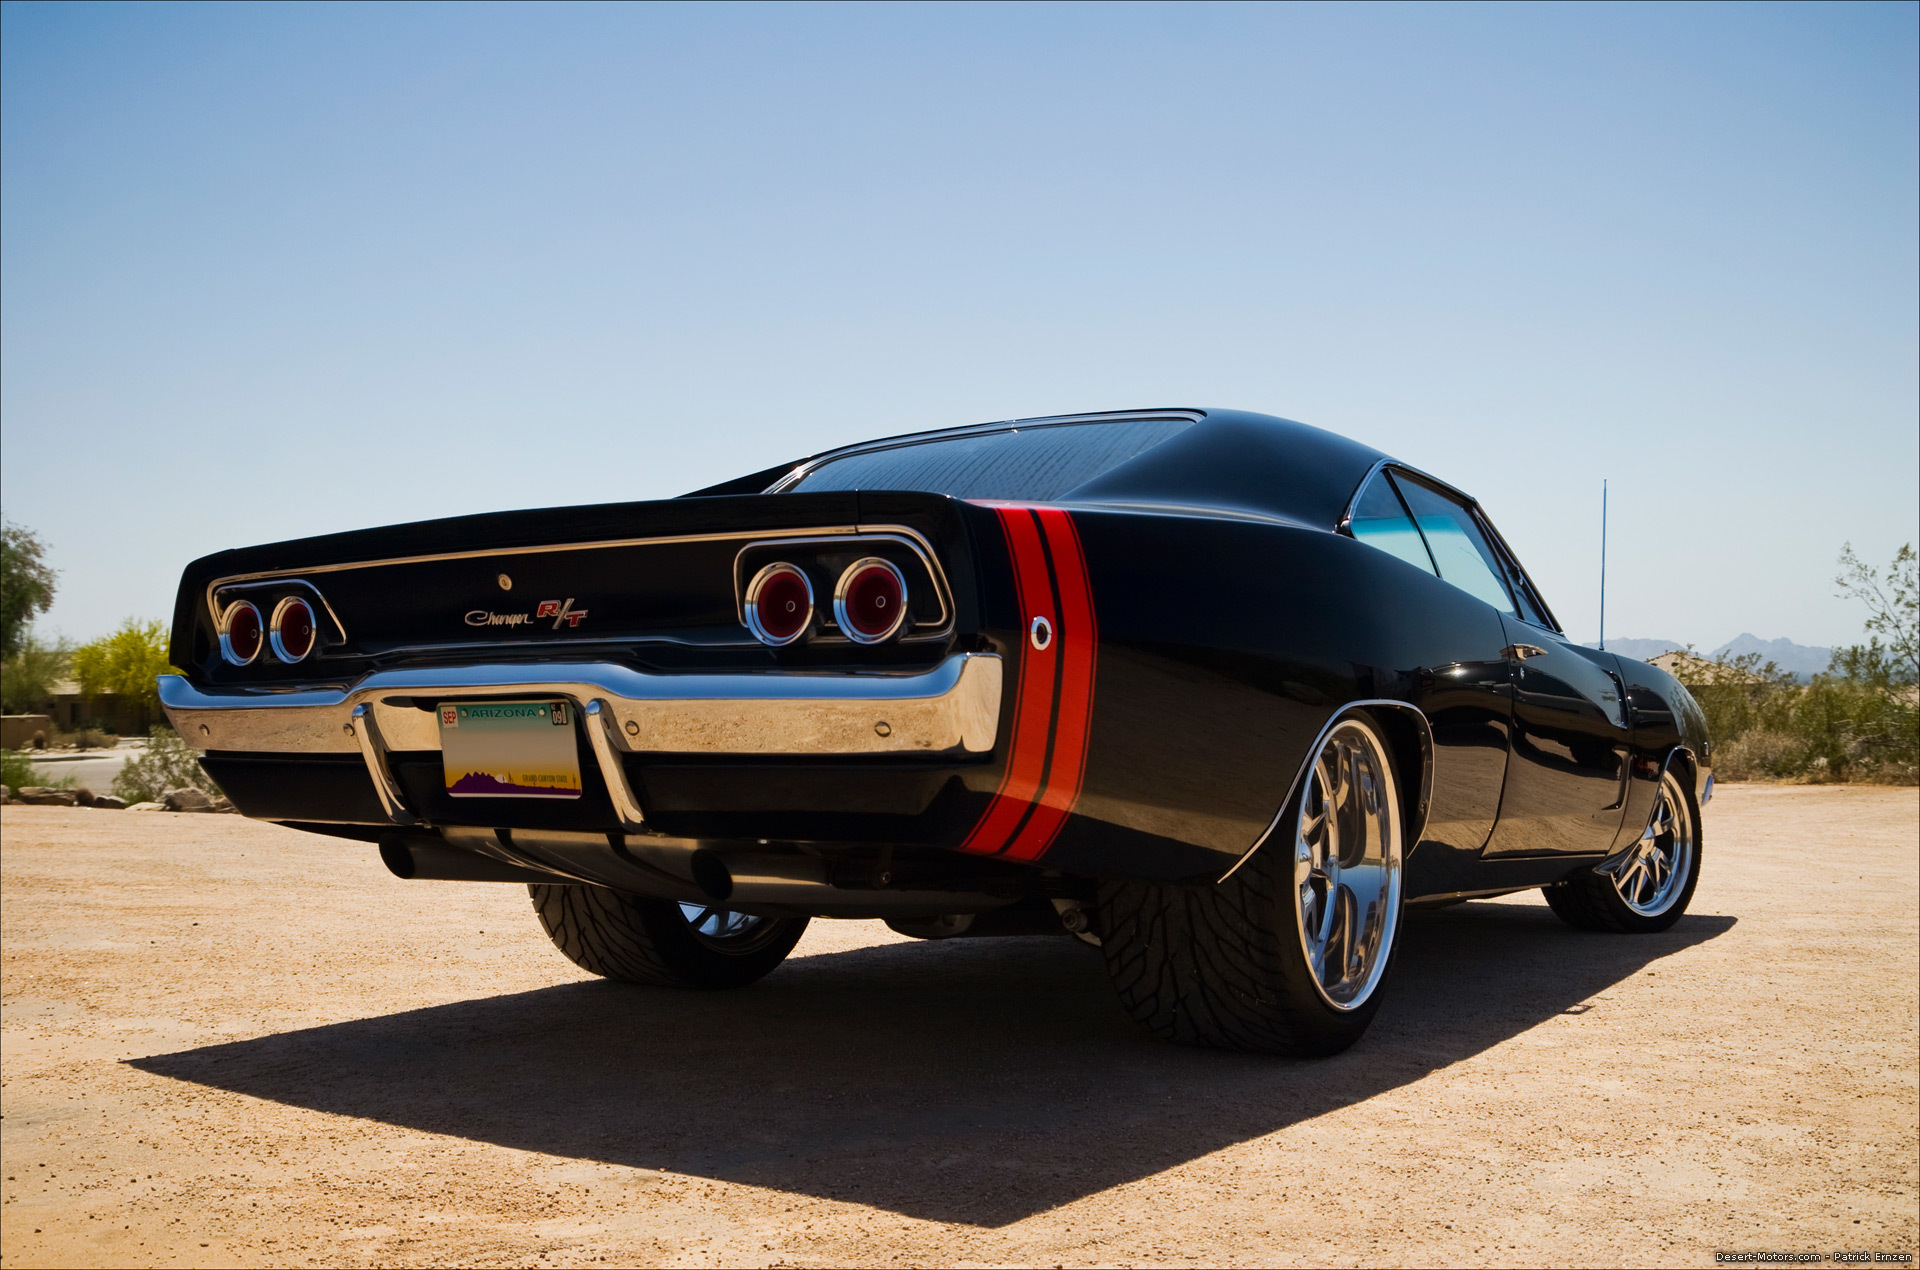 Muscle  Wallpapers on Cars Muscle Dodge Charger R T Hd Wallpaper   Cars   Trucks   278791